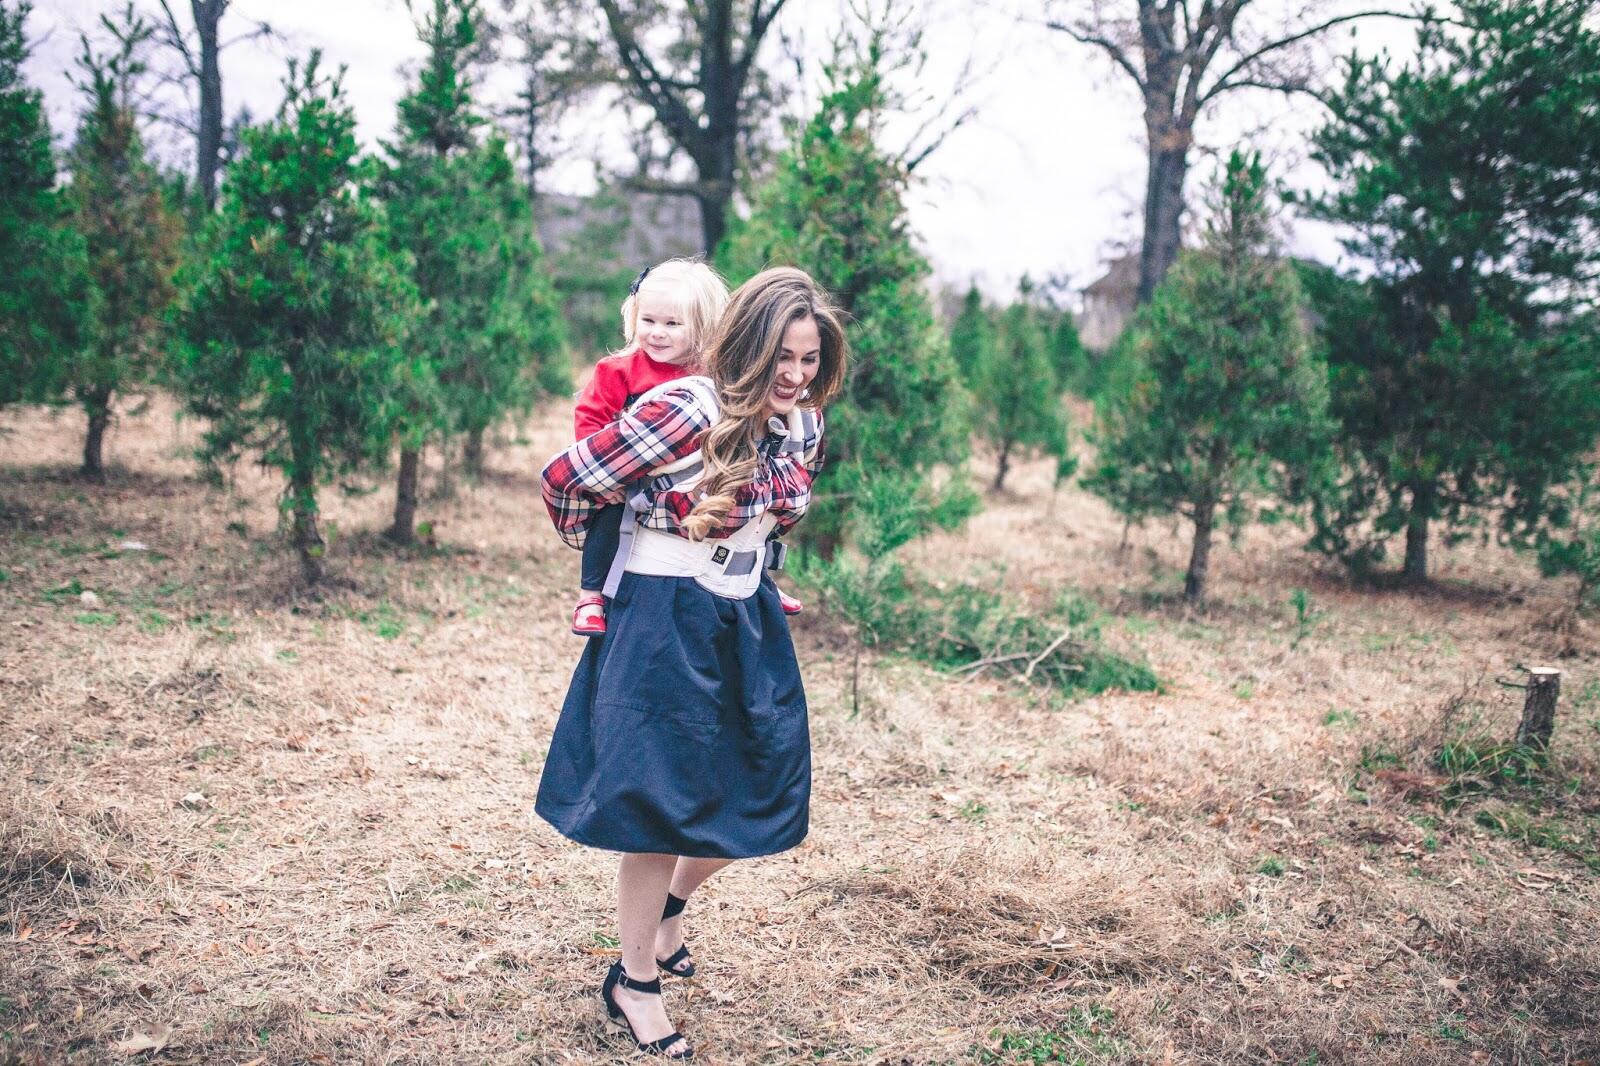 Babywearing with LILLEbaby Carrier at the Christmas Tree Farm by East Memphis mom blogger Walking in Memphis in High Heels